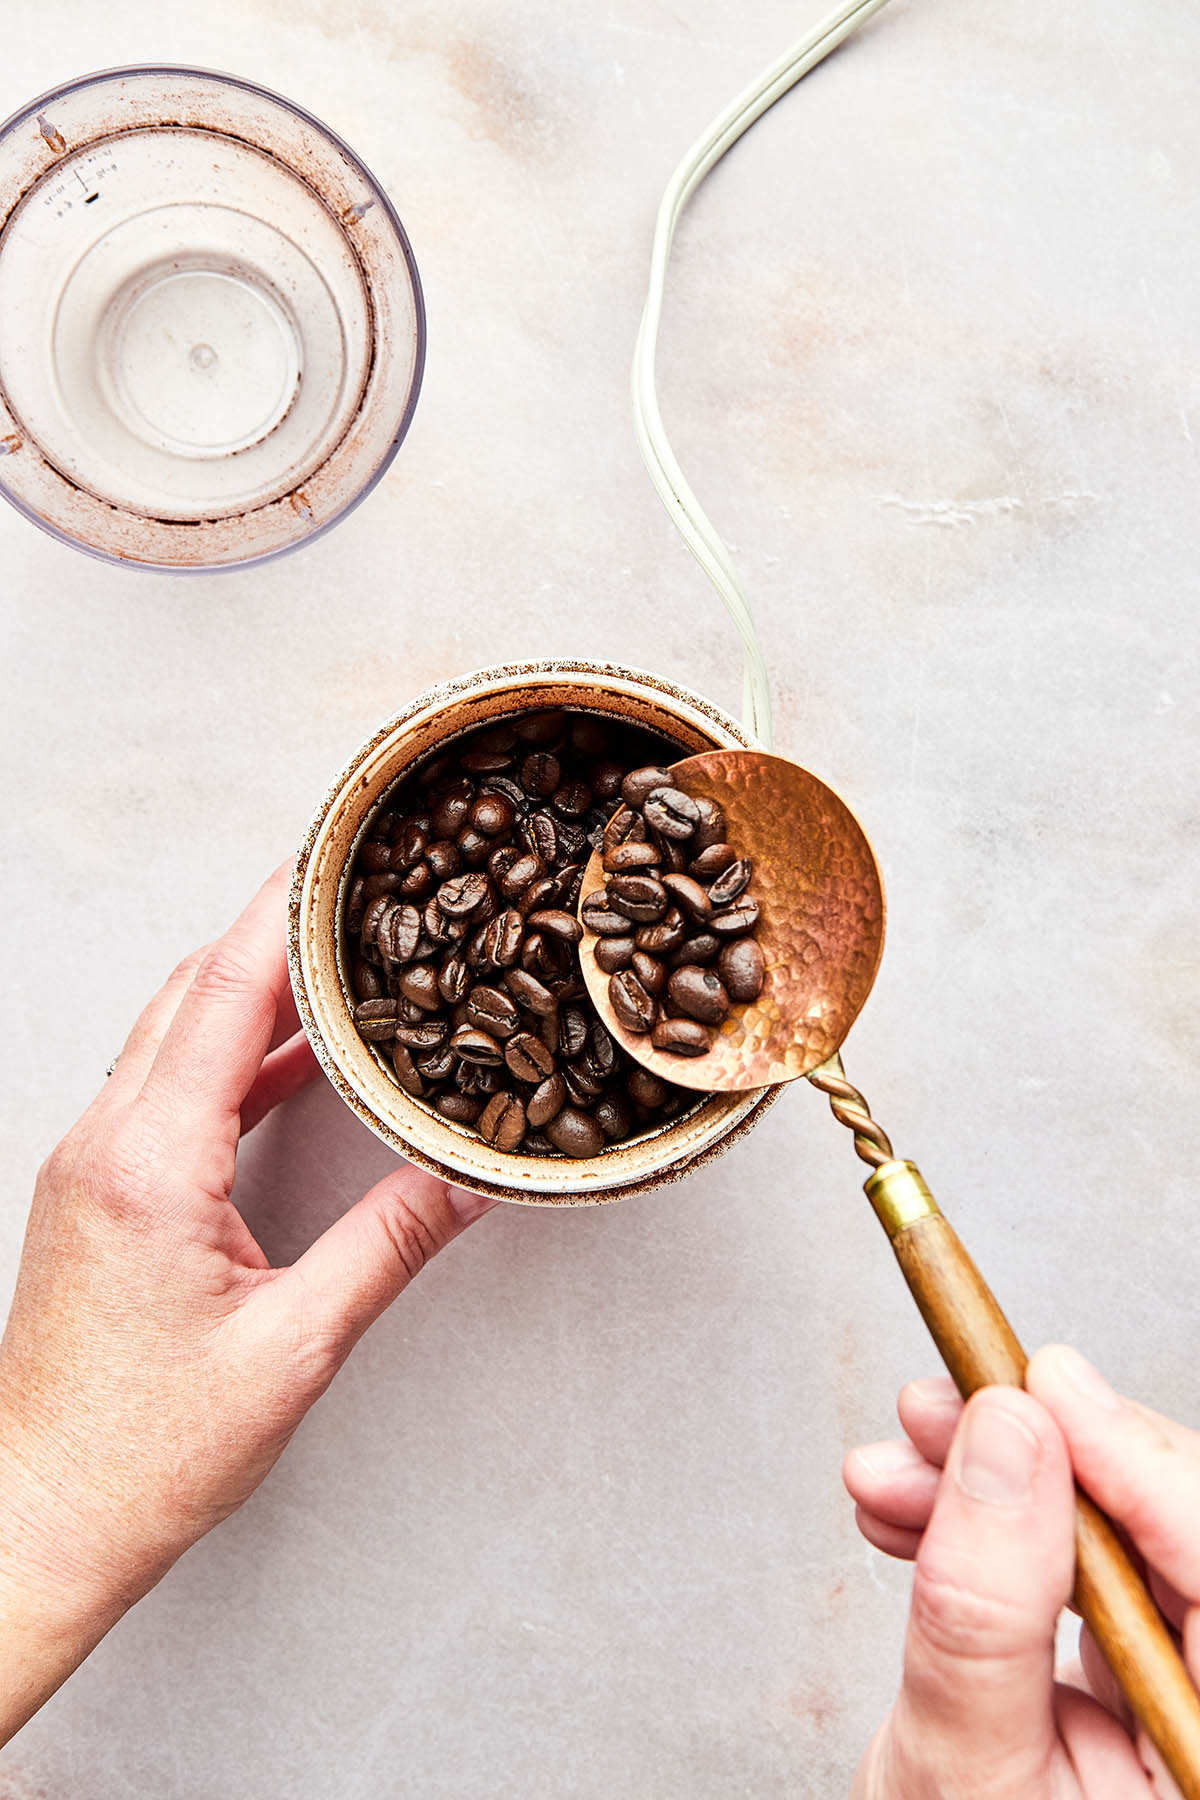 A hand using a copper spoon to portion coffee beans into a coffee grinder.